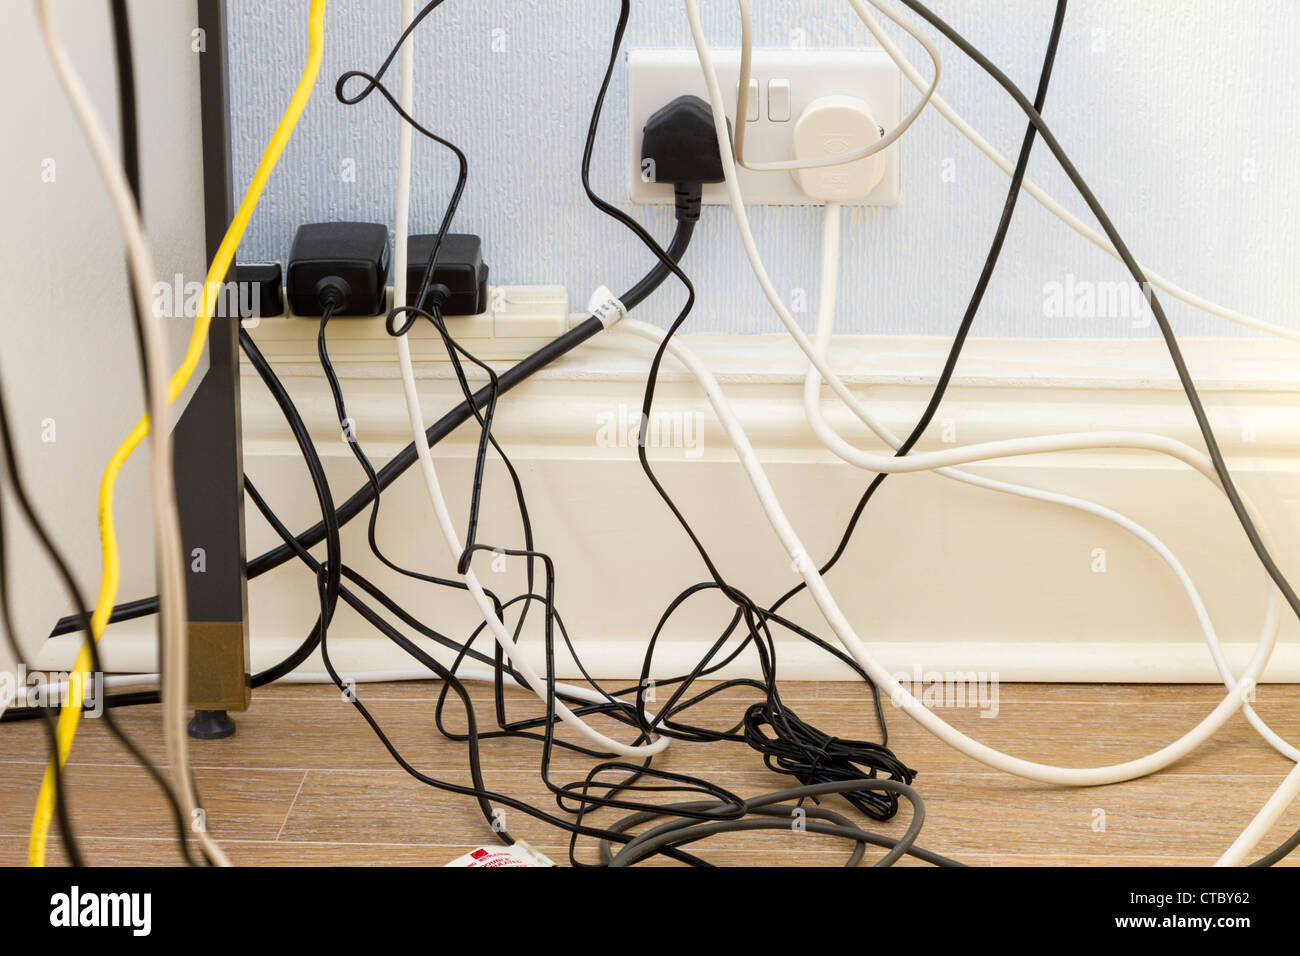 Untidy office cables and wires Stock Photo